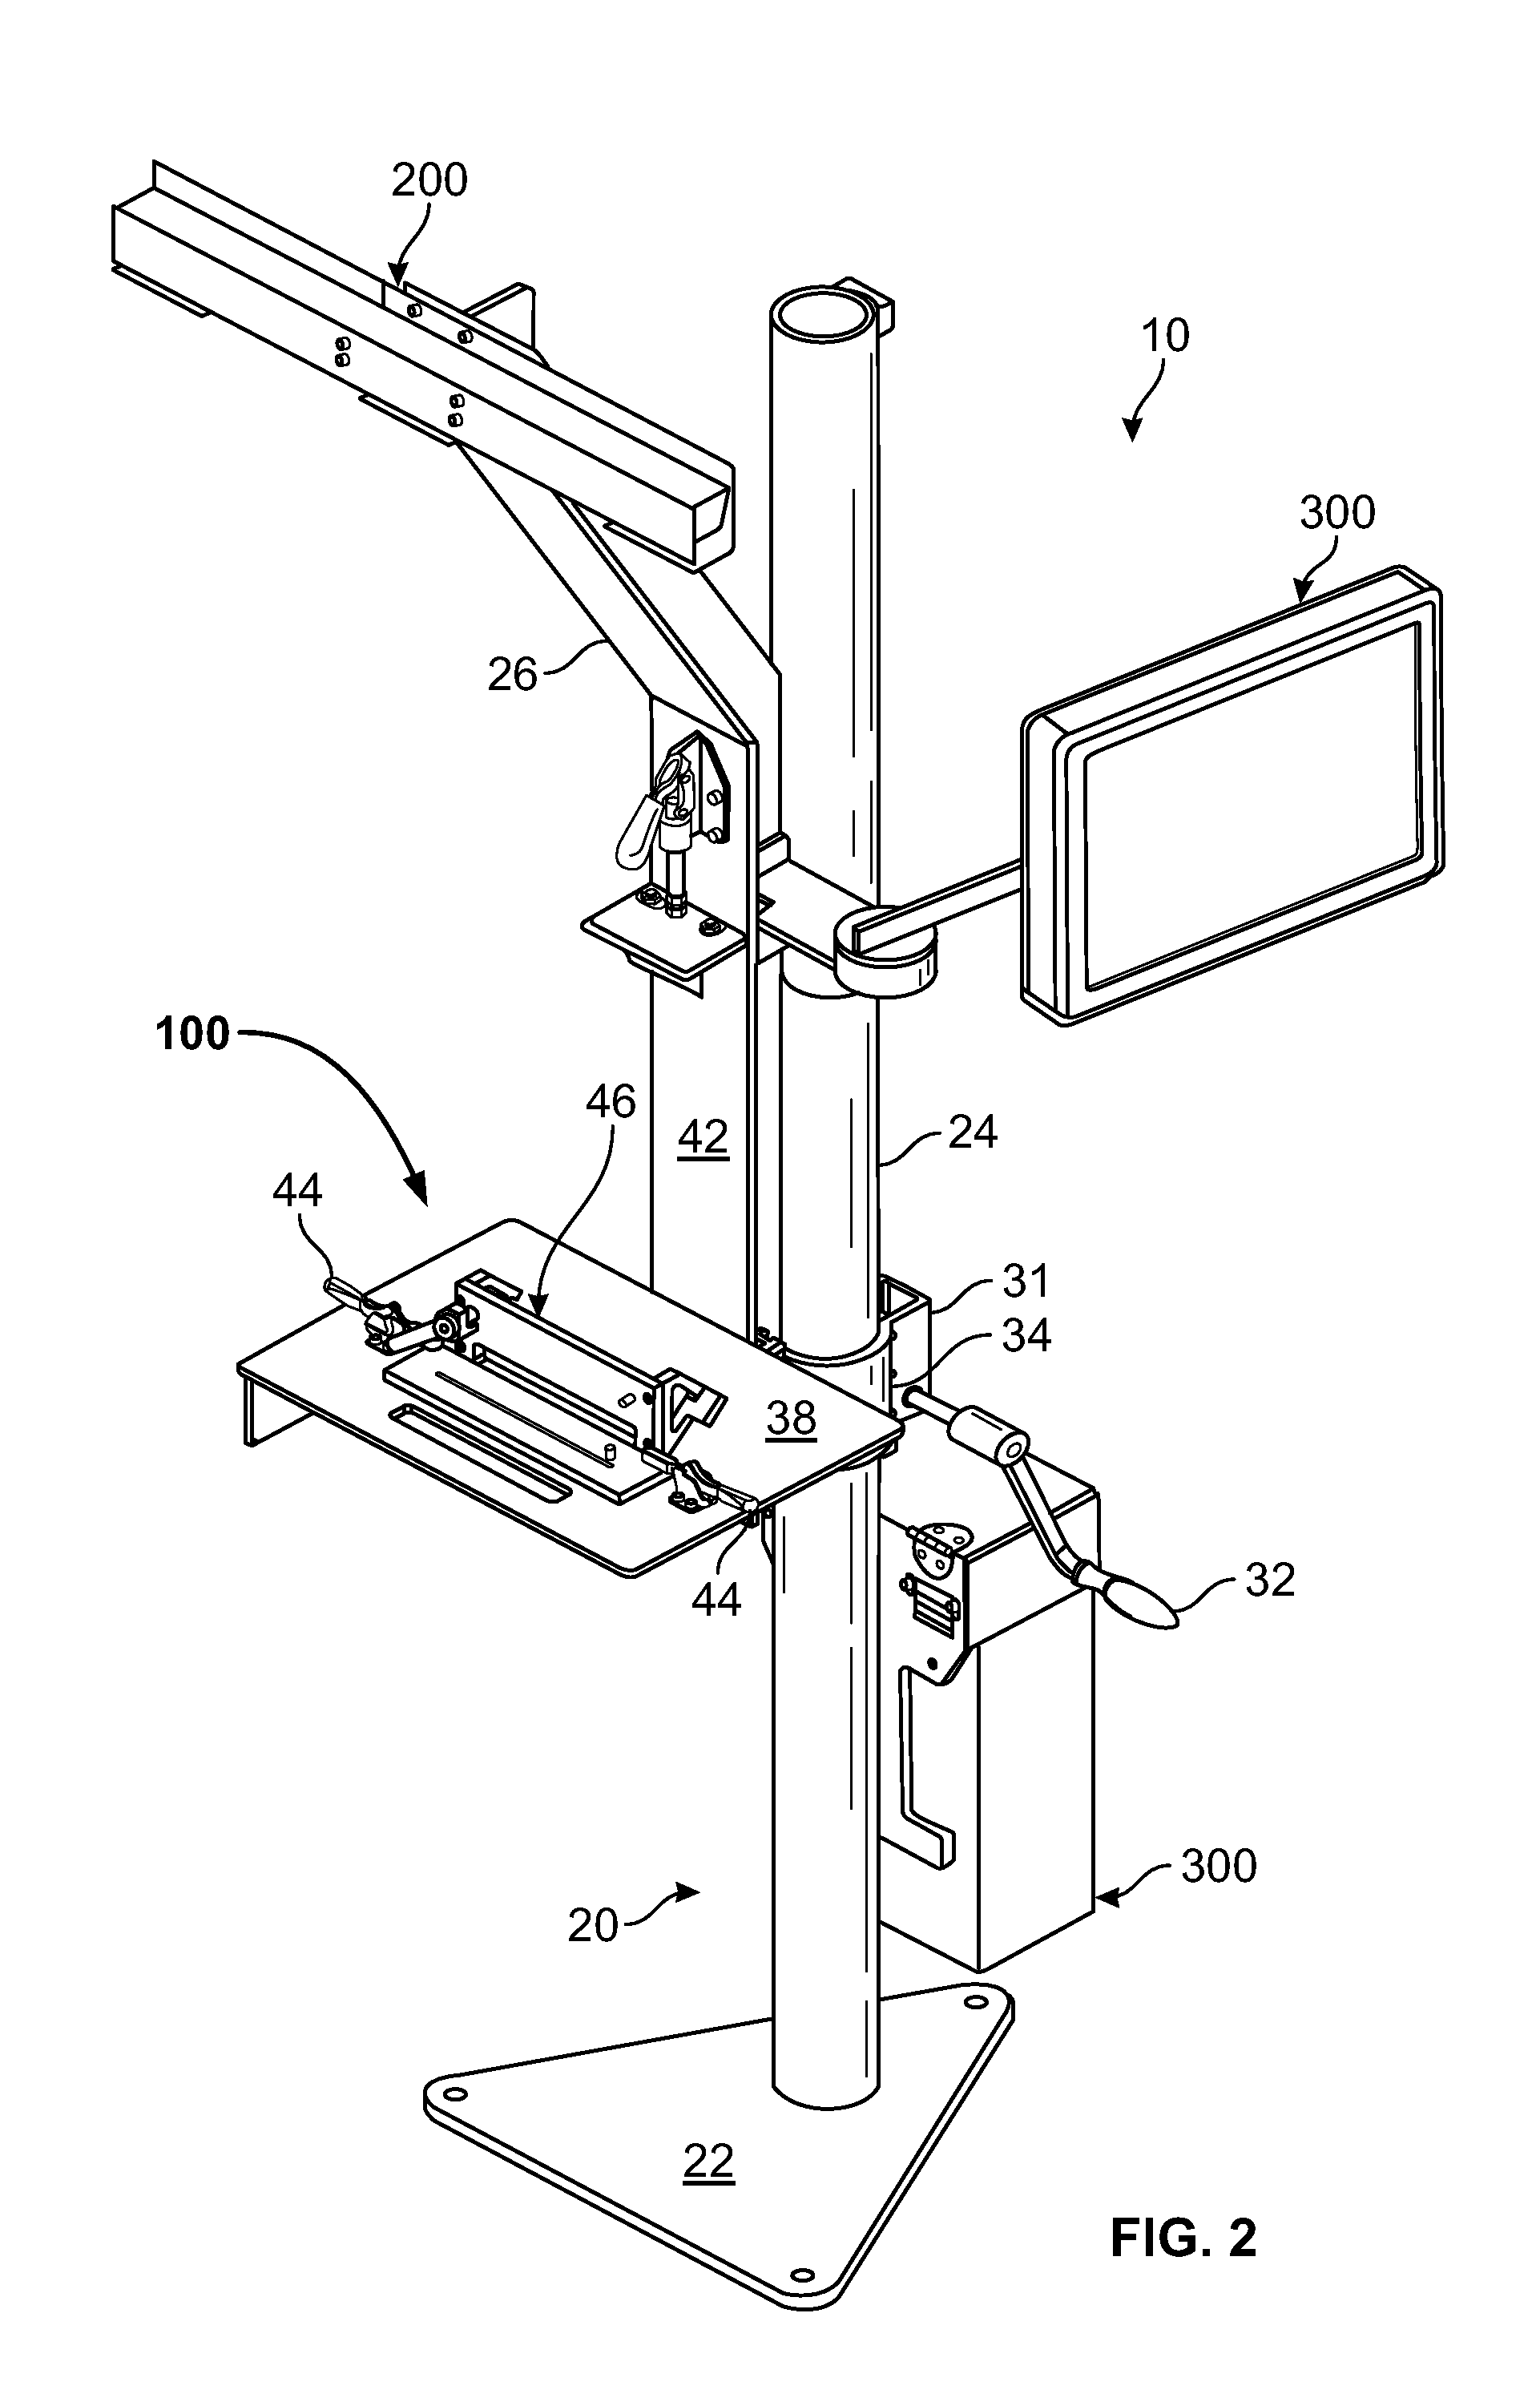 System for characterizing manual welding operations